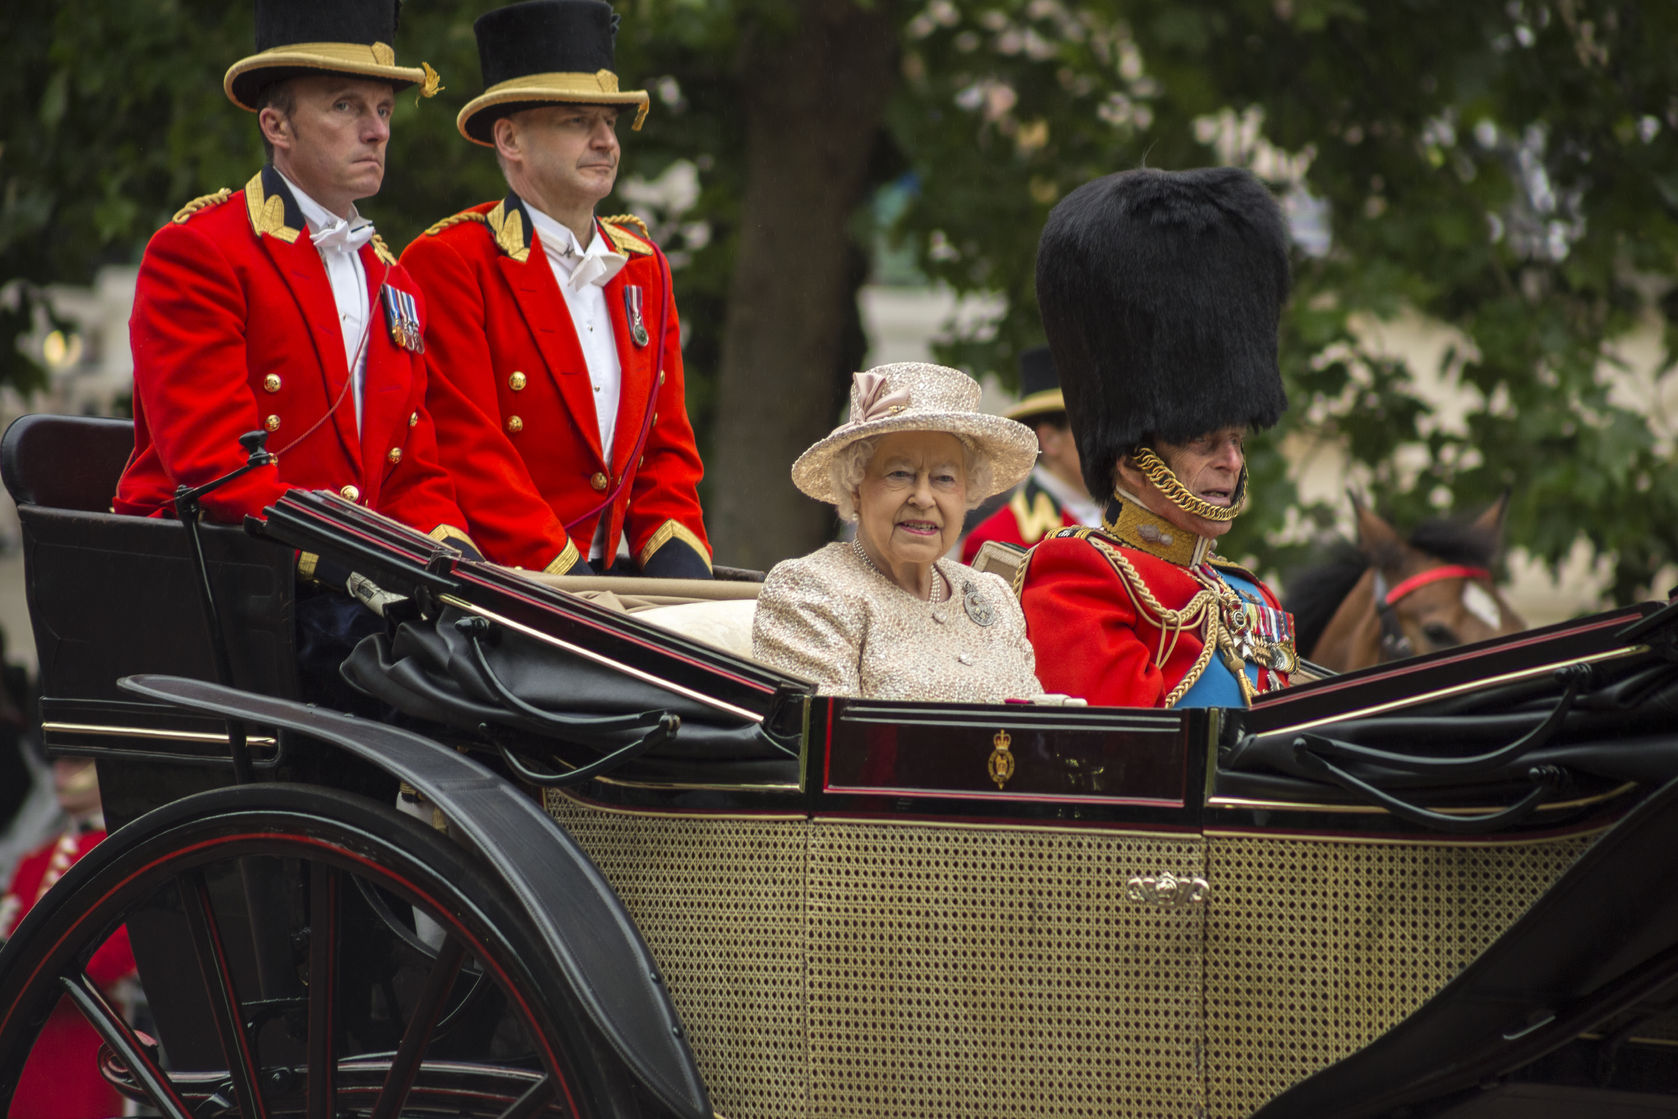 42992148 - queen elizabeth ii in an open carriage with prince philip. trooping the colour 2015 marking the queens official birthday london uk